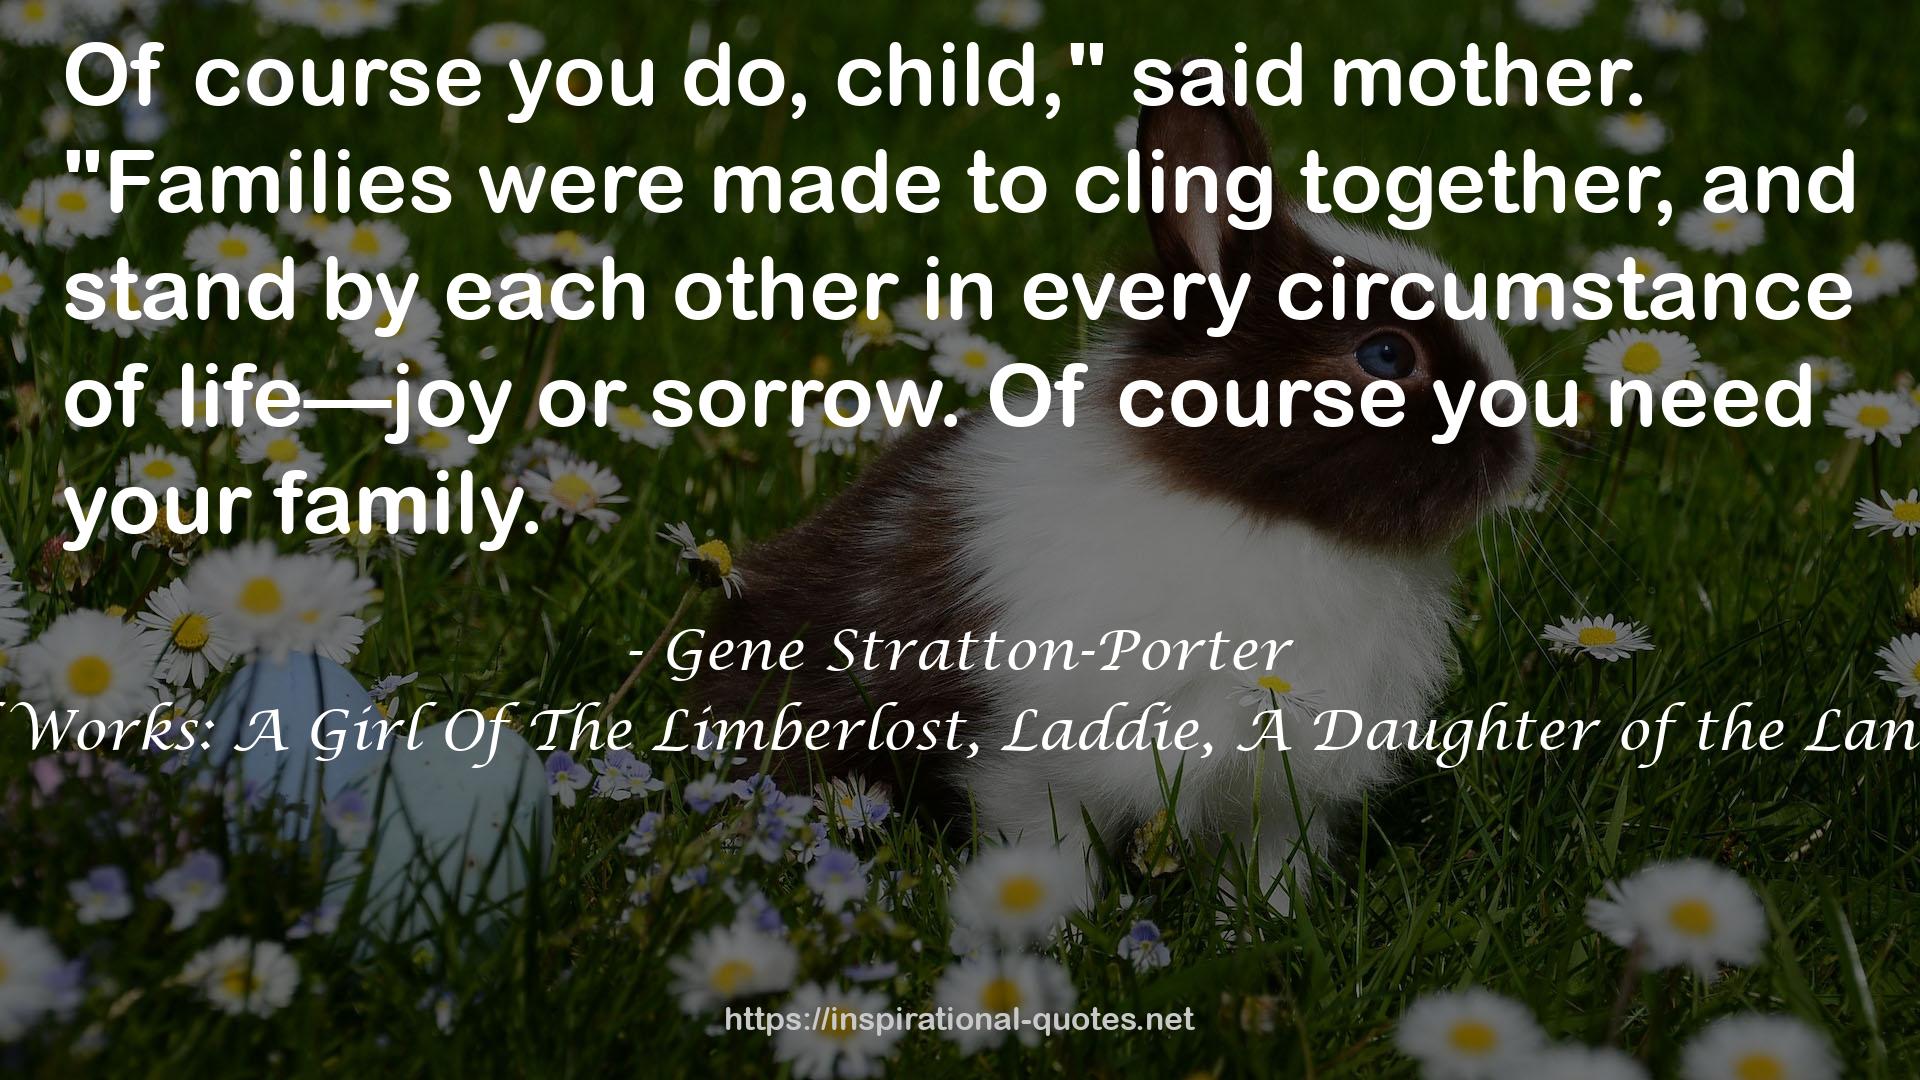 Gene Stratton-Porter's Collected Works: A Girl Of The Limberlost, Laddie, A Daughter of the Land, Freckles, and More!( 11 works) QUOTES